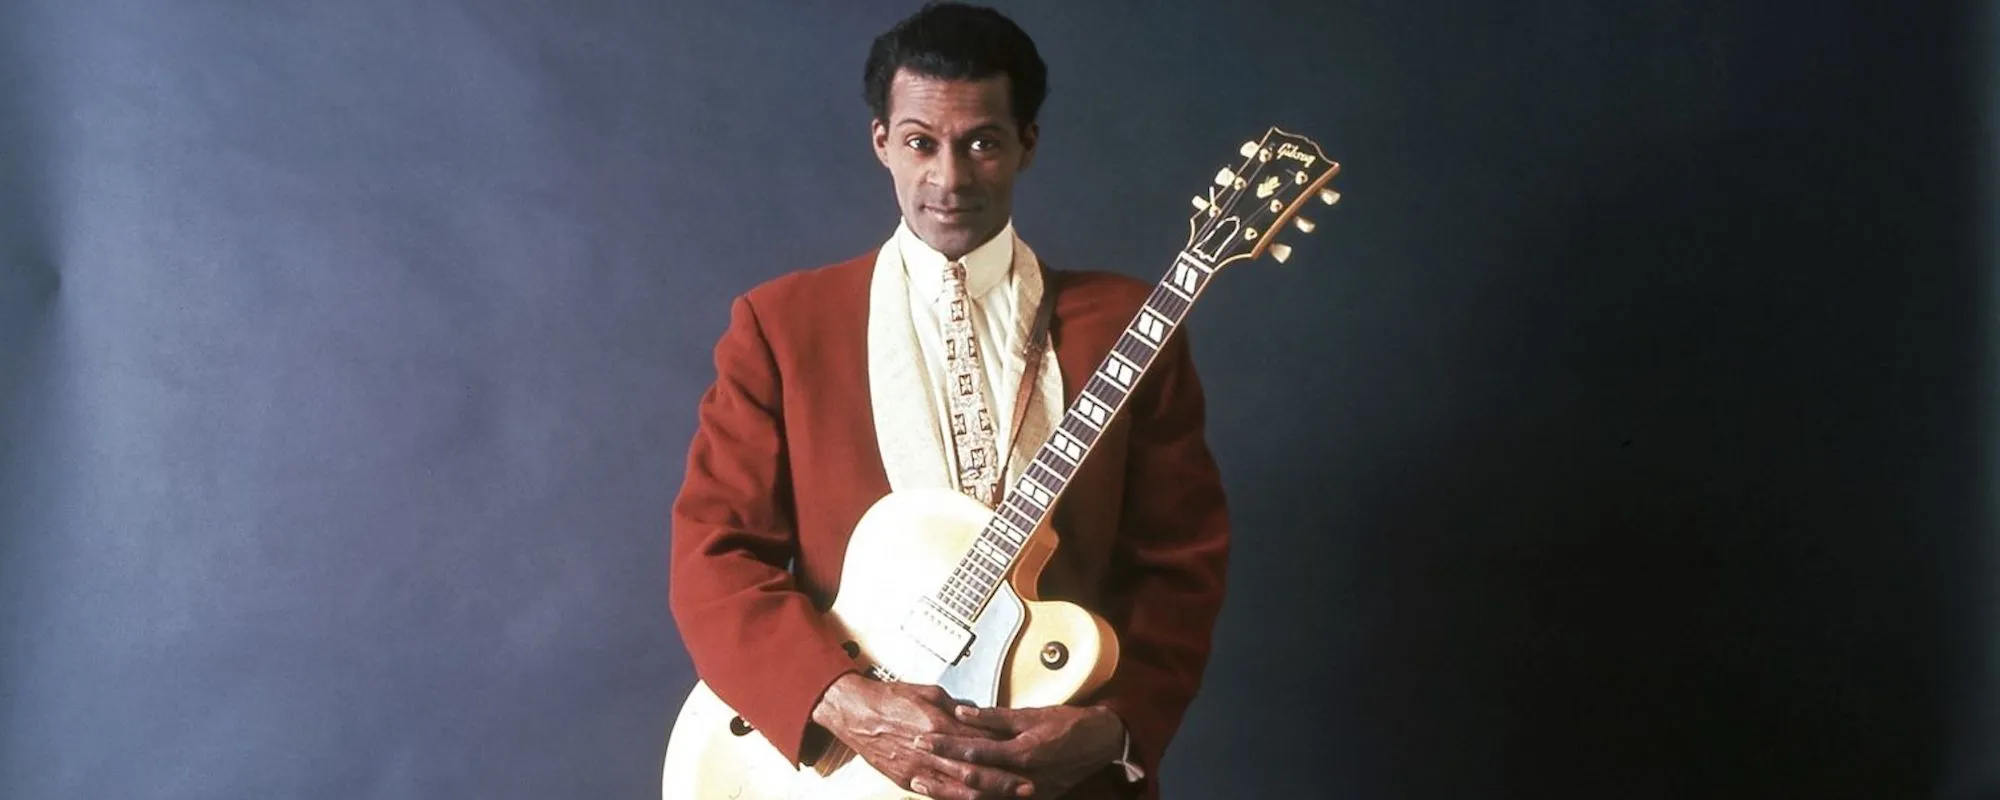 Chuck Berry’s ‘Live From Blueberry Hill’ Gets Release in Honor of His 95th Birthday